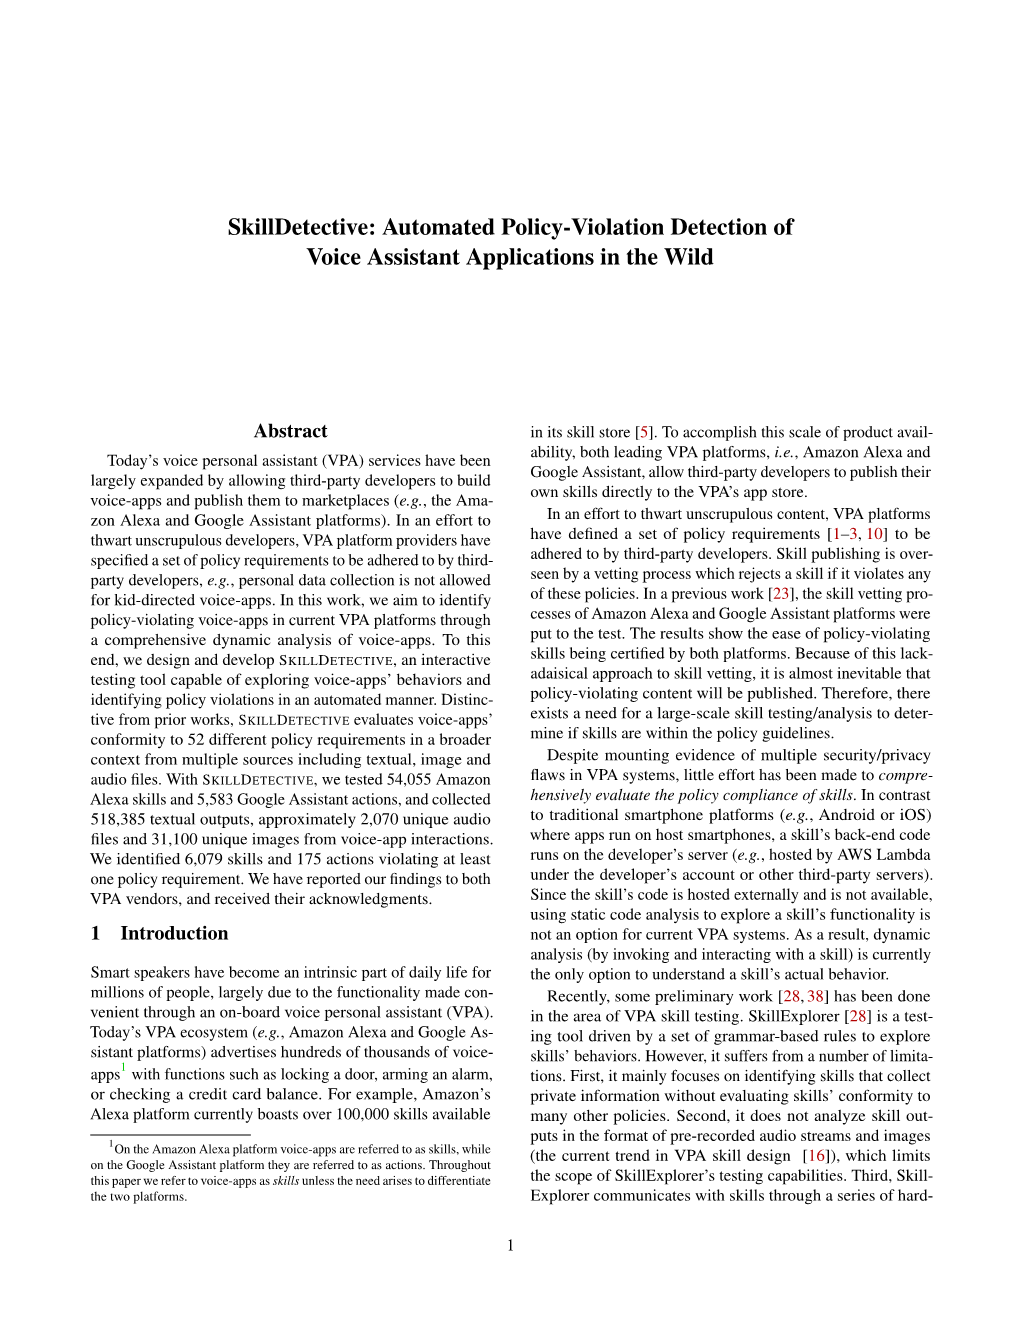 Automated Policy-Violation Detection of Voice Assistant Applications in the Wild